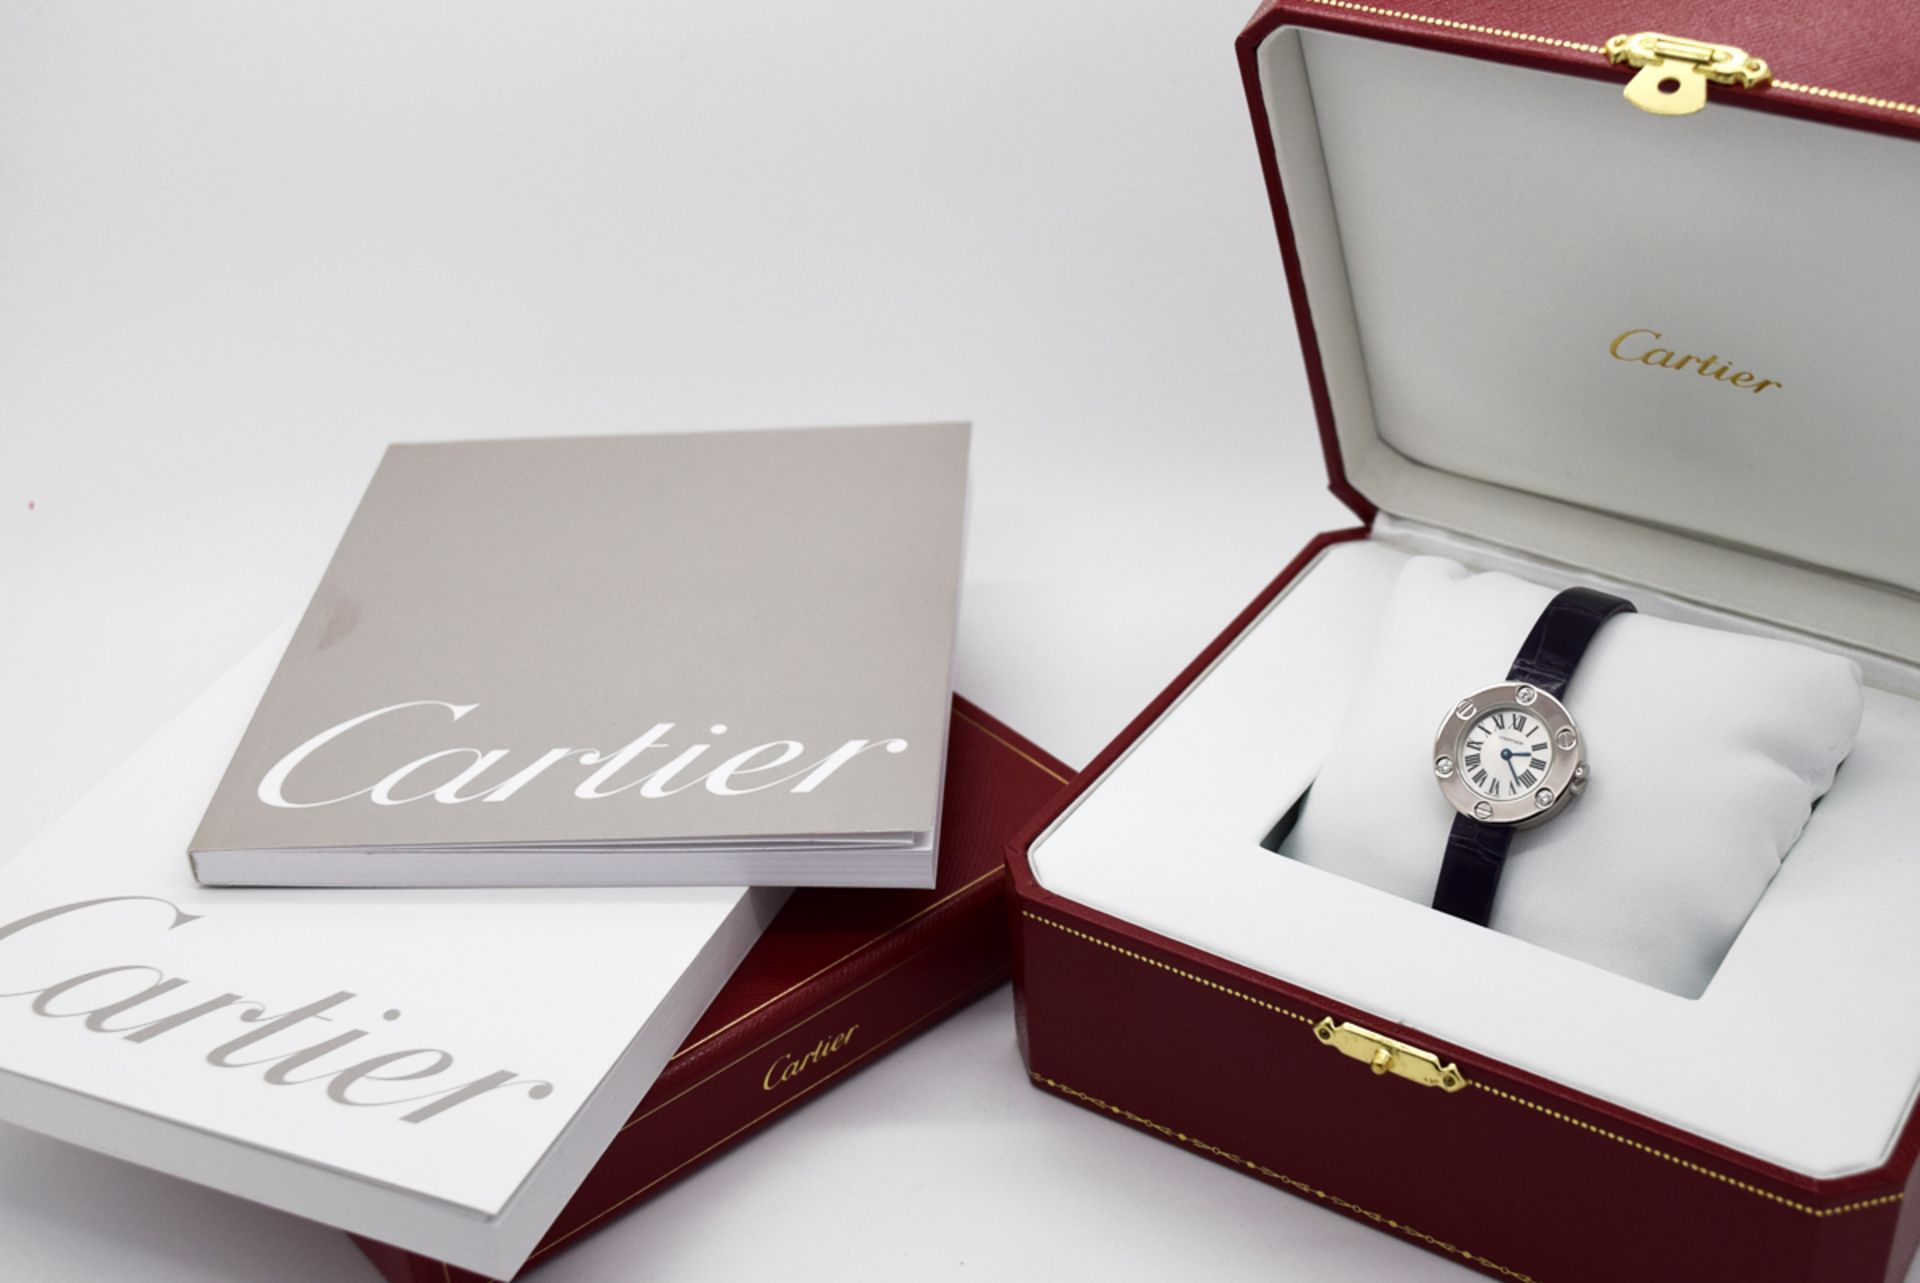 CARTIER 'LOVE' DIAMONDS WATCH - 18K WHITE GOLD AND DIAMONDS - BOX AND PAPERS! - Image 2 of 15